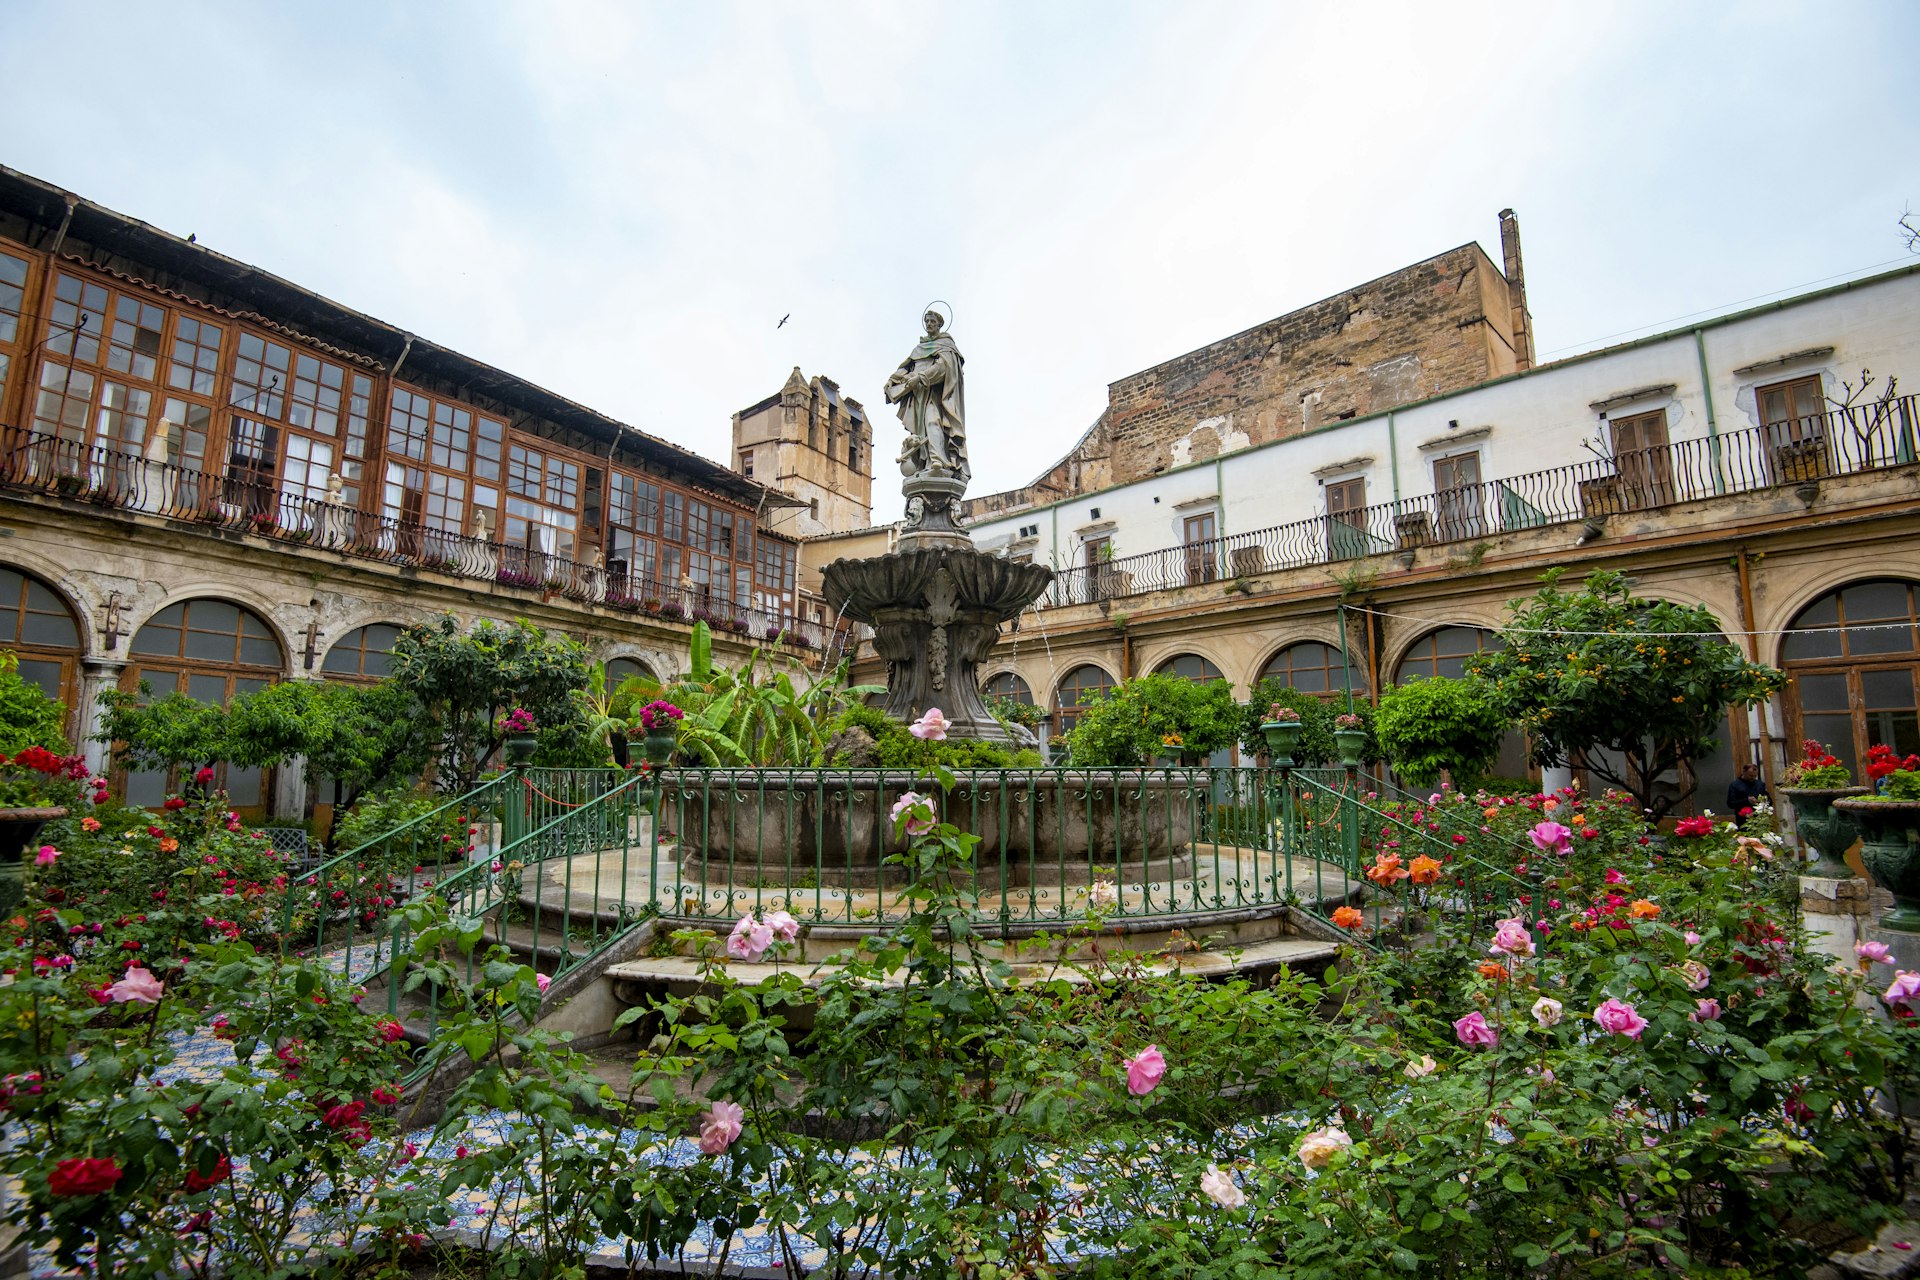 The courtyard of the Chiesa di Santa Caterina d'Alessandria in Palermo, Italy, with blooming flowers.